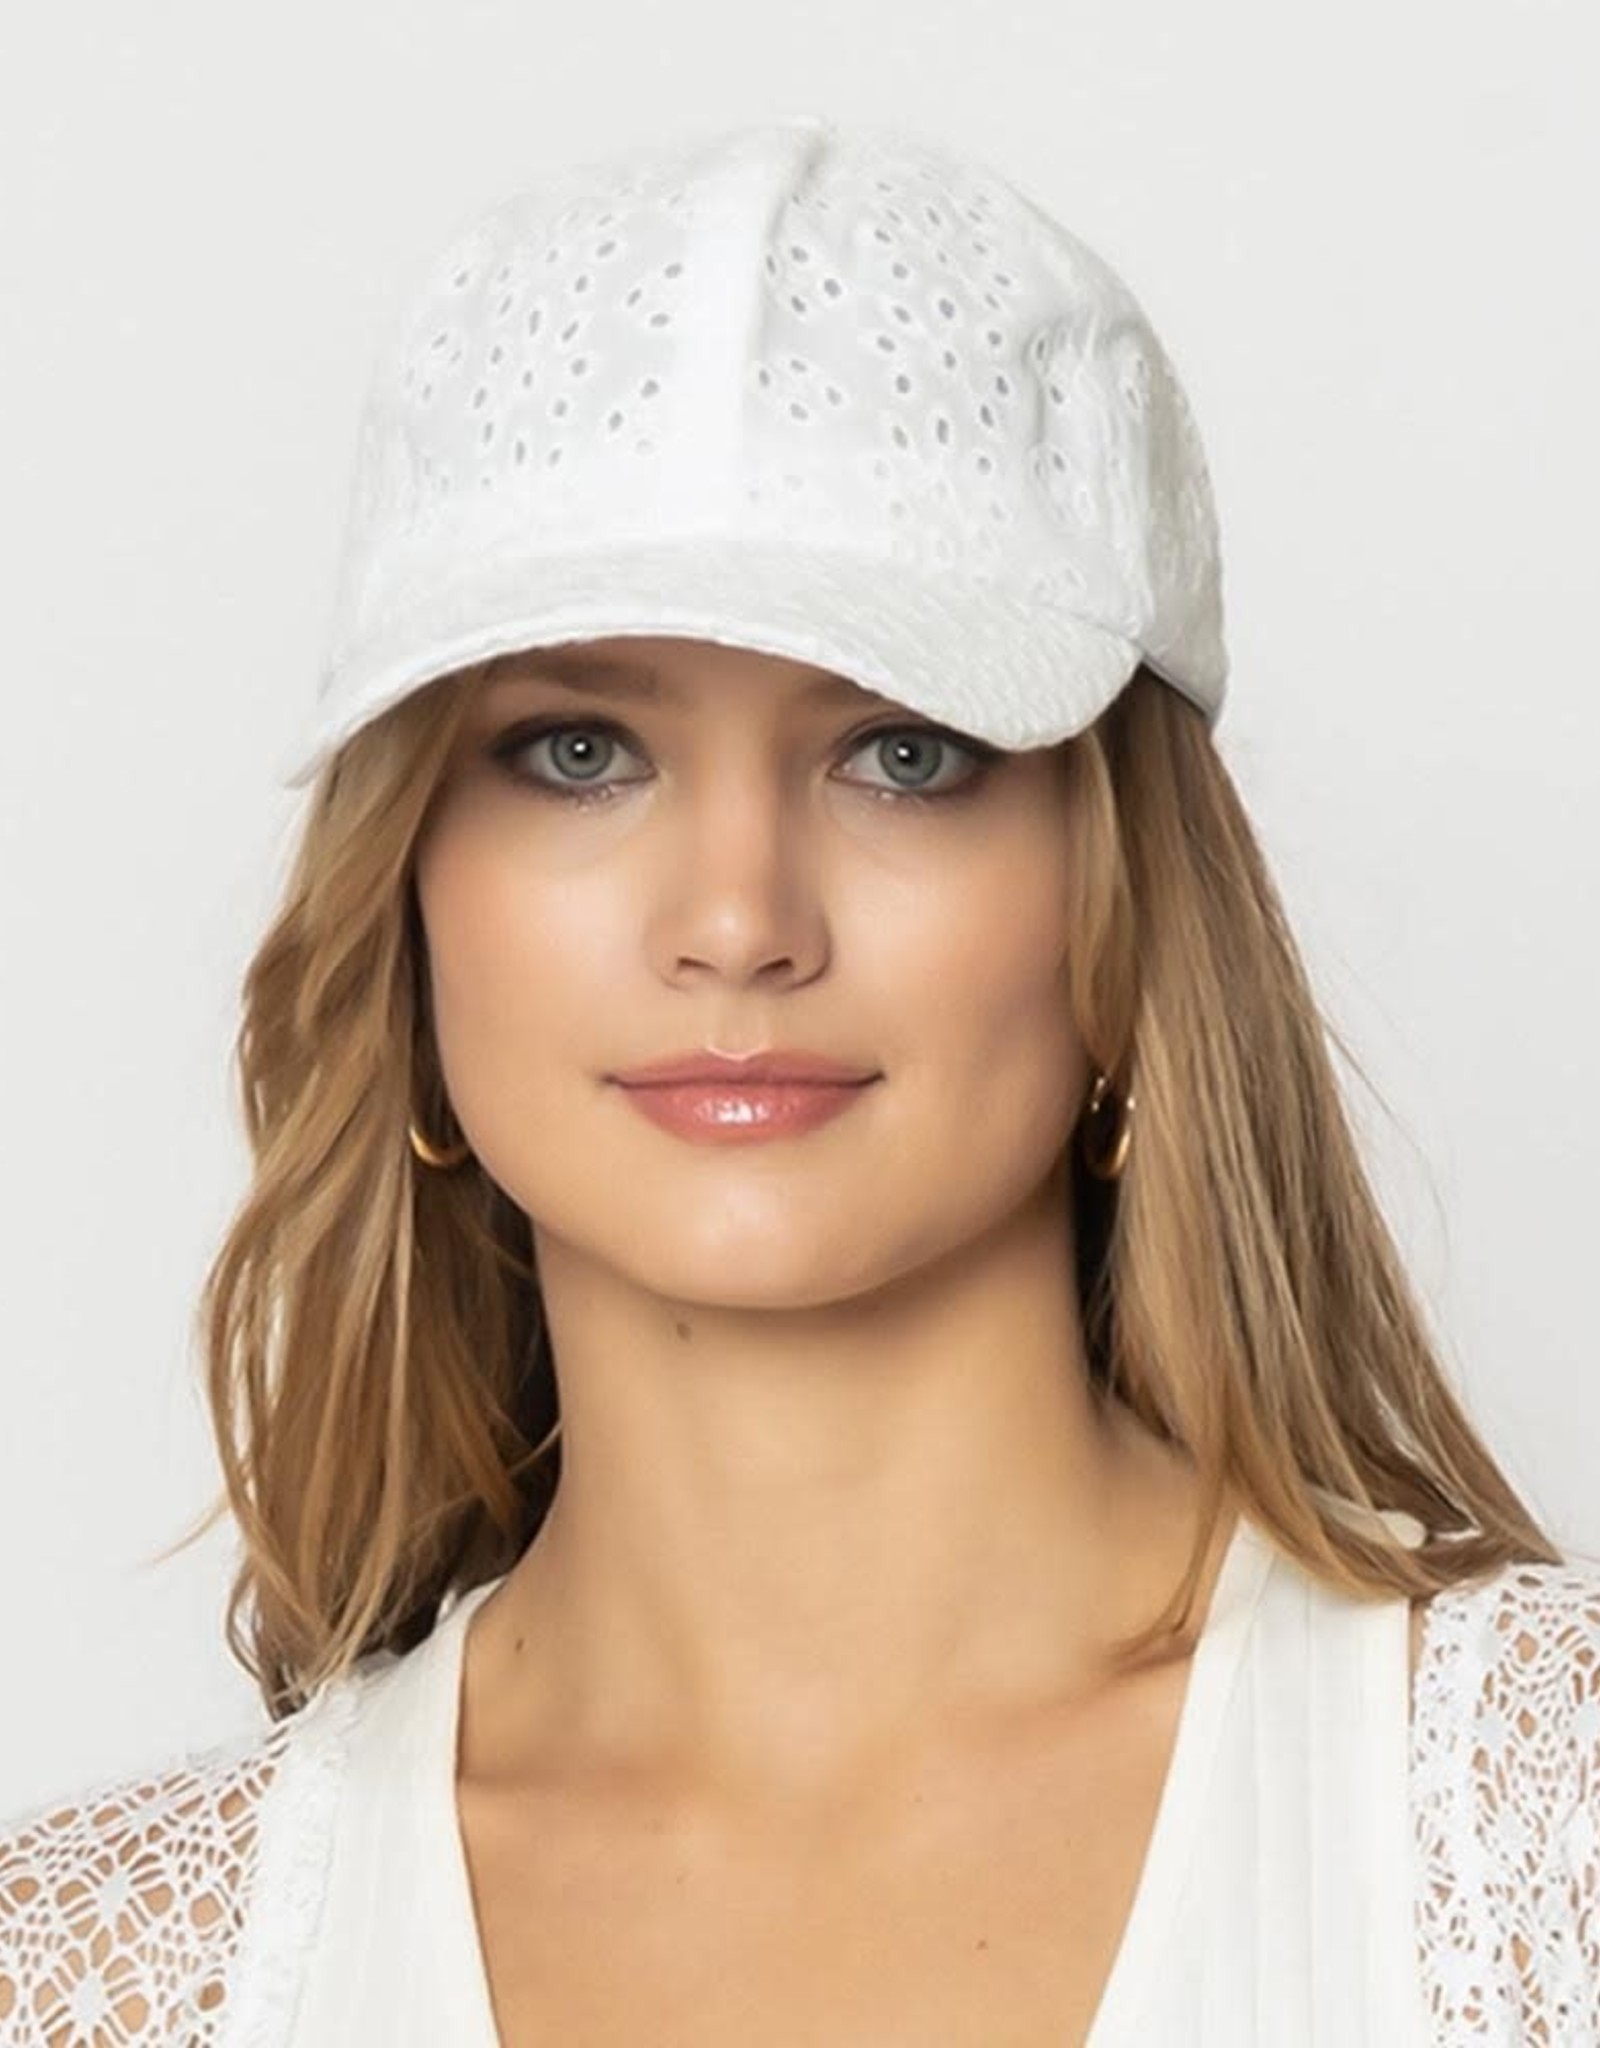 judson 728897 - Floral Eyelet Baseball Cap With Tie - White